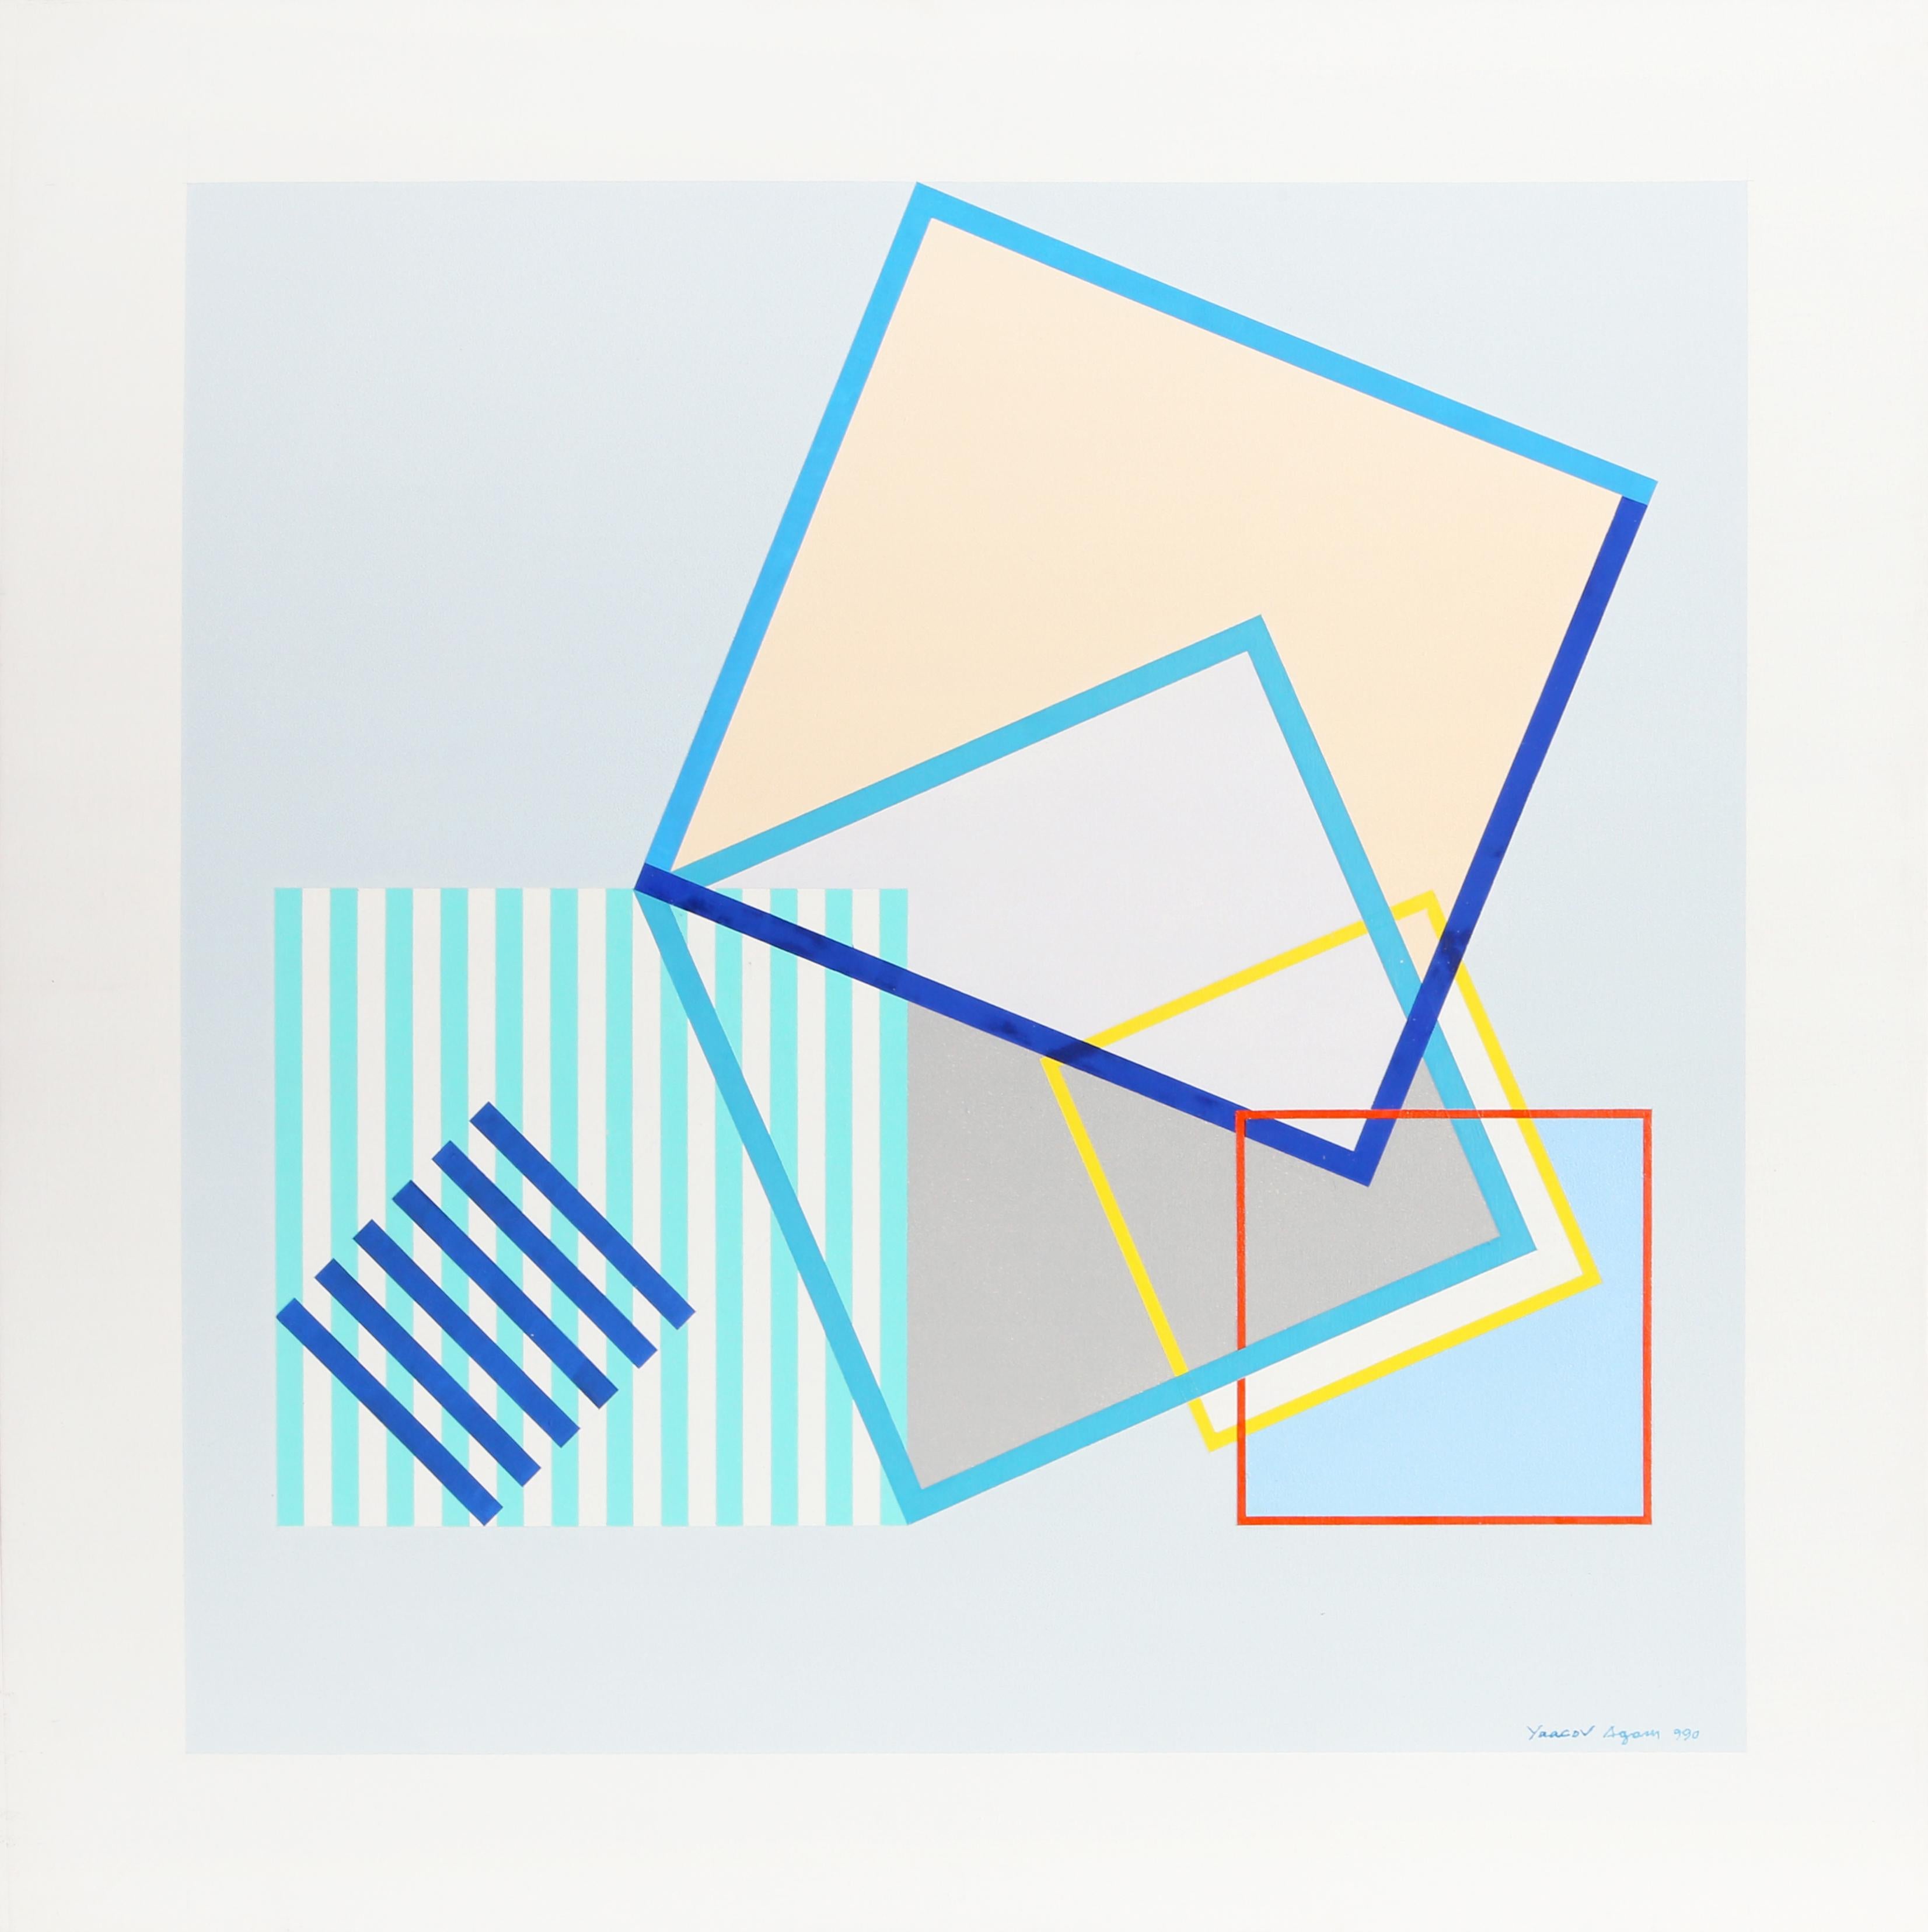 "Image au Carre" or "Square Image" is an original painting on linen mounted to wood by Israeli Kinetic artist, Yaacov Agam. The painting is signed, titled and dated verso and signed/dated lower right recto. Presented in a plexi box frame.

Image Au